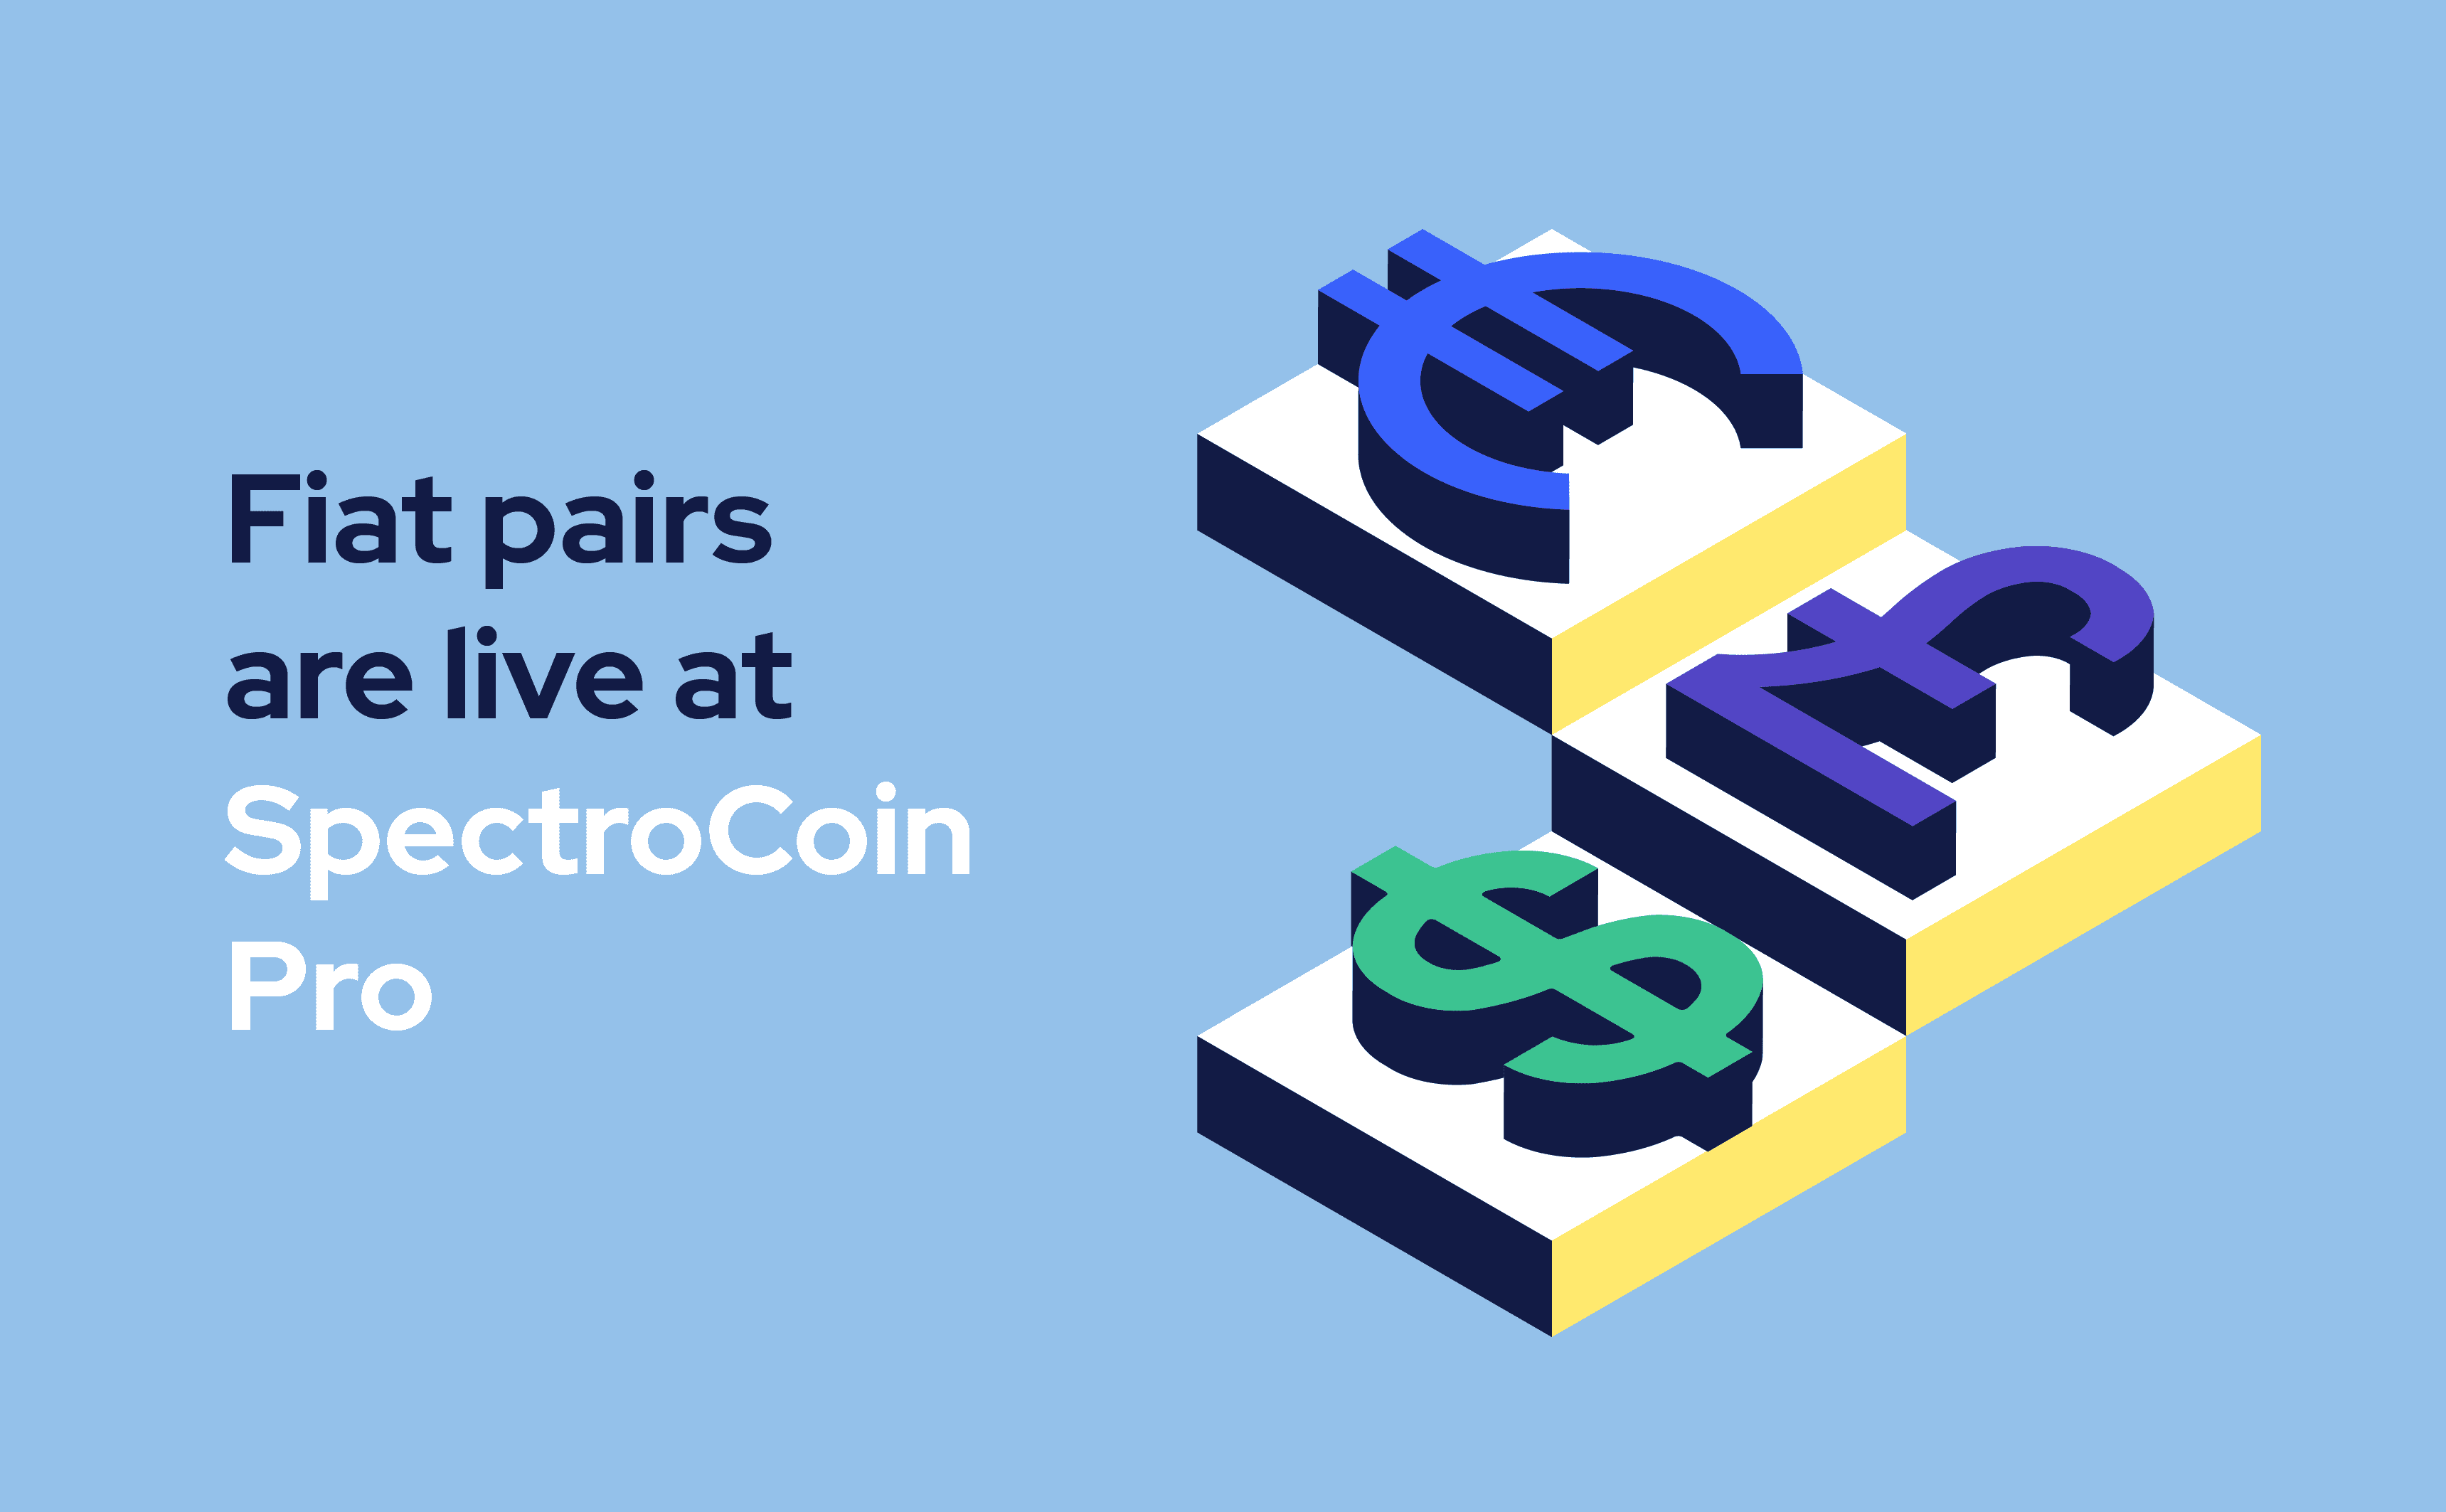 Trade fiat pairs at SpectroCoin Pro